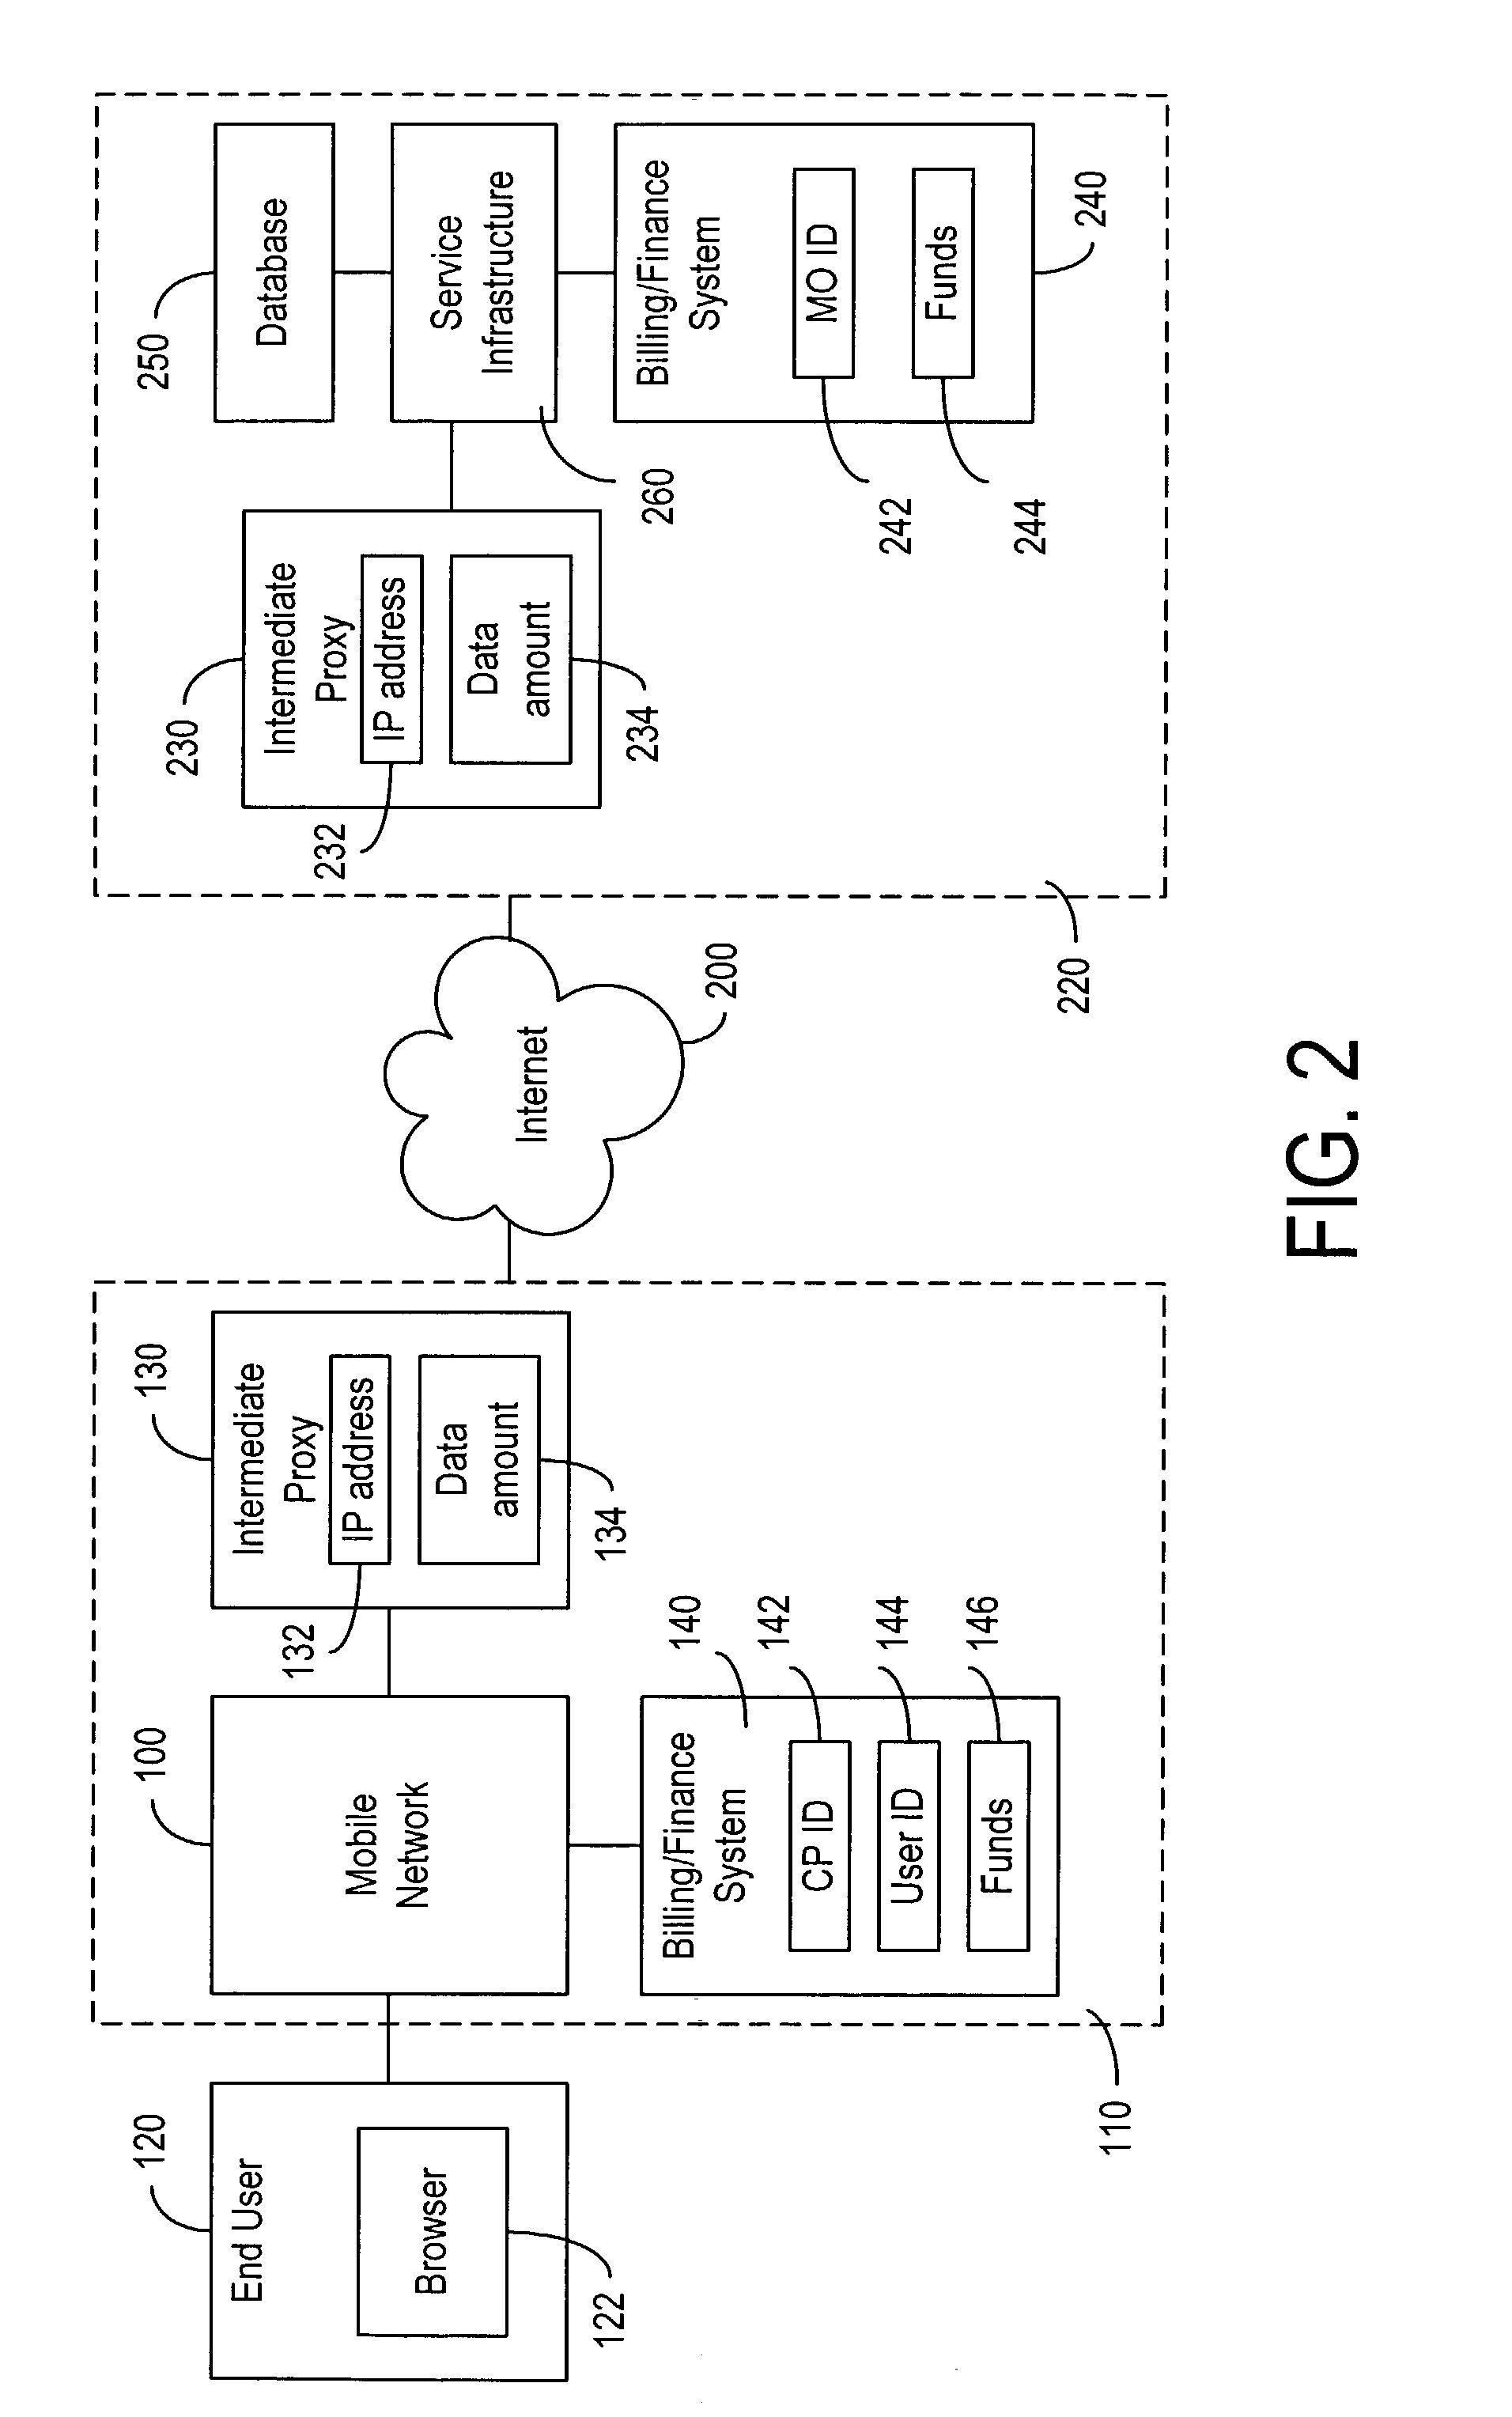 Method and system for sharing transmission revenue between mobile operators and content providers